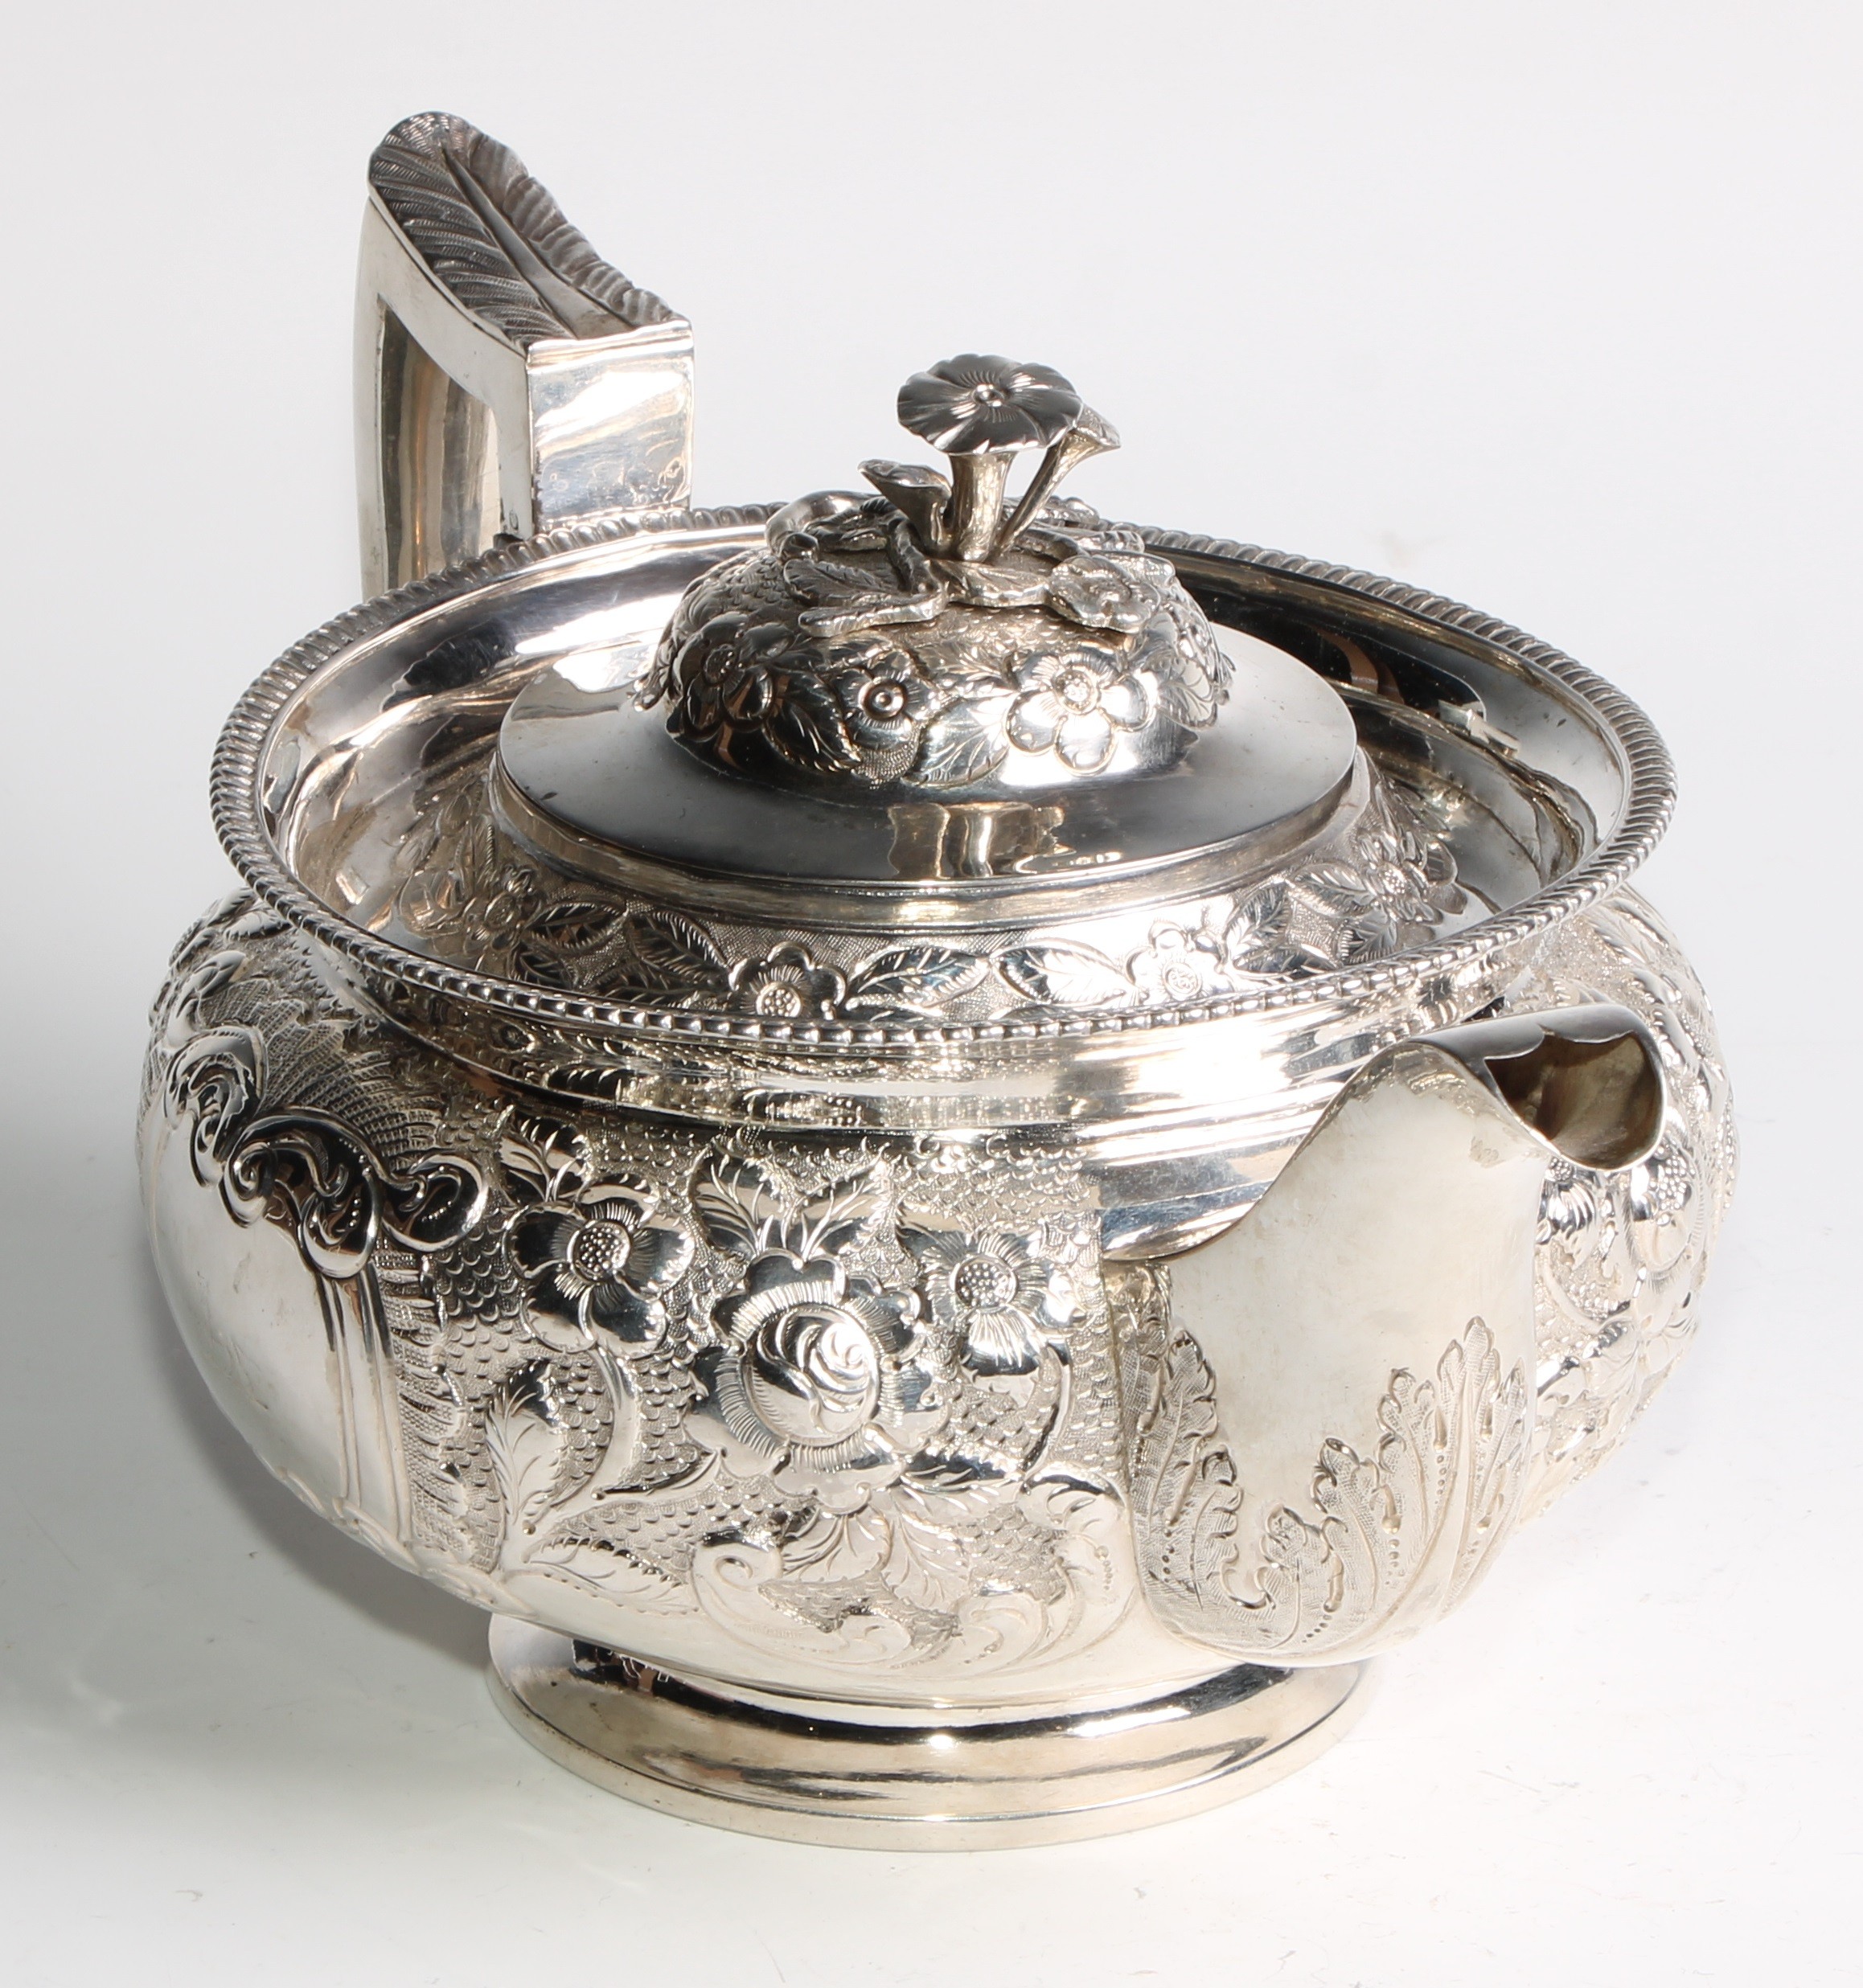 A George III Irish silver teapot, chased with chased with flowers and stiff leaves on a scale - Image 3 of 6